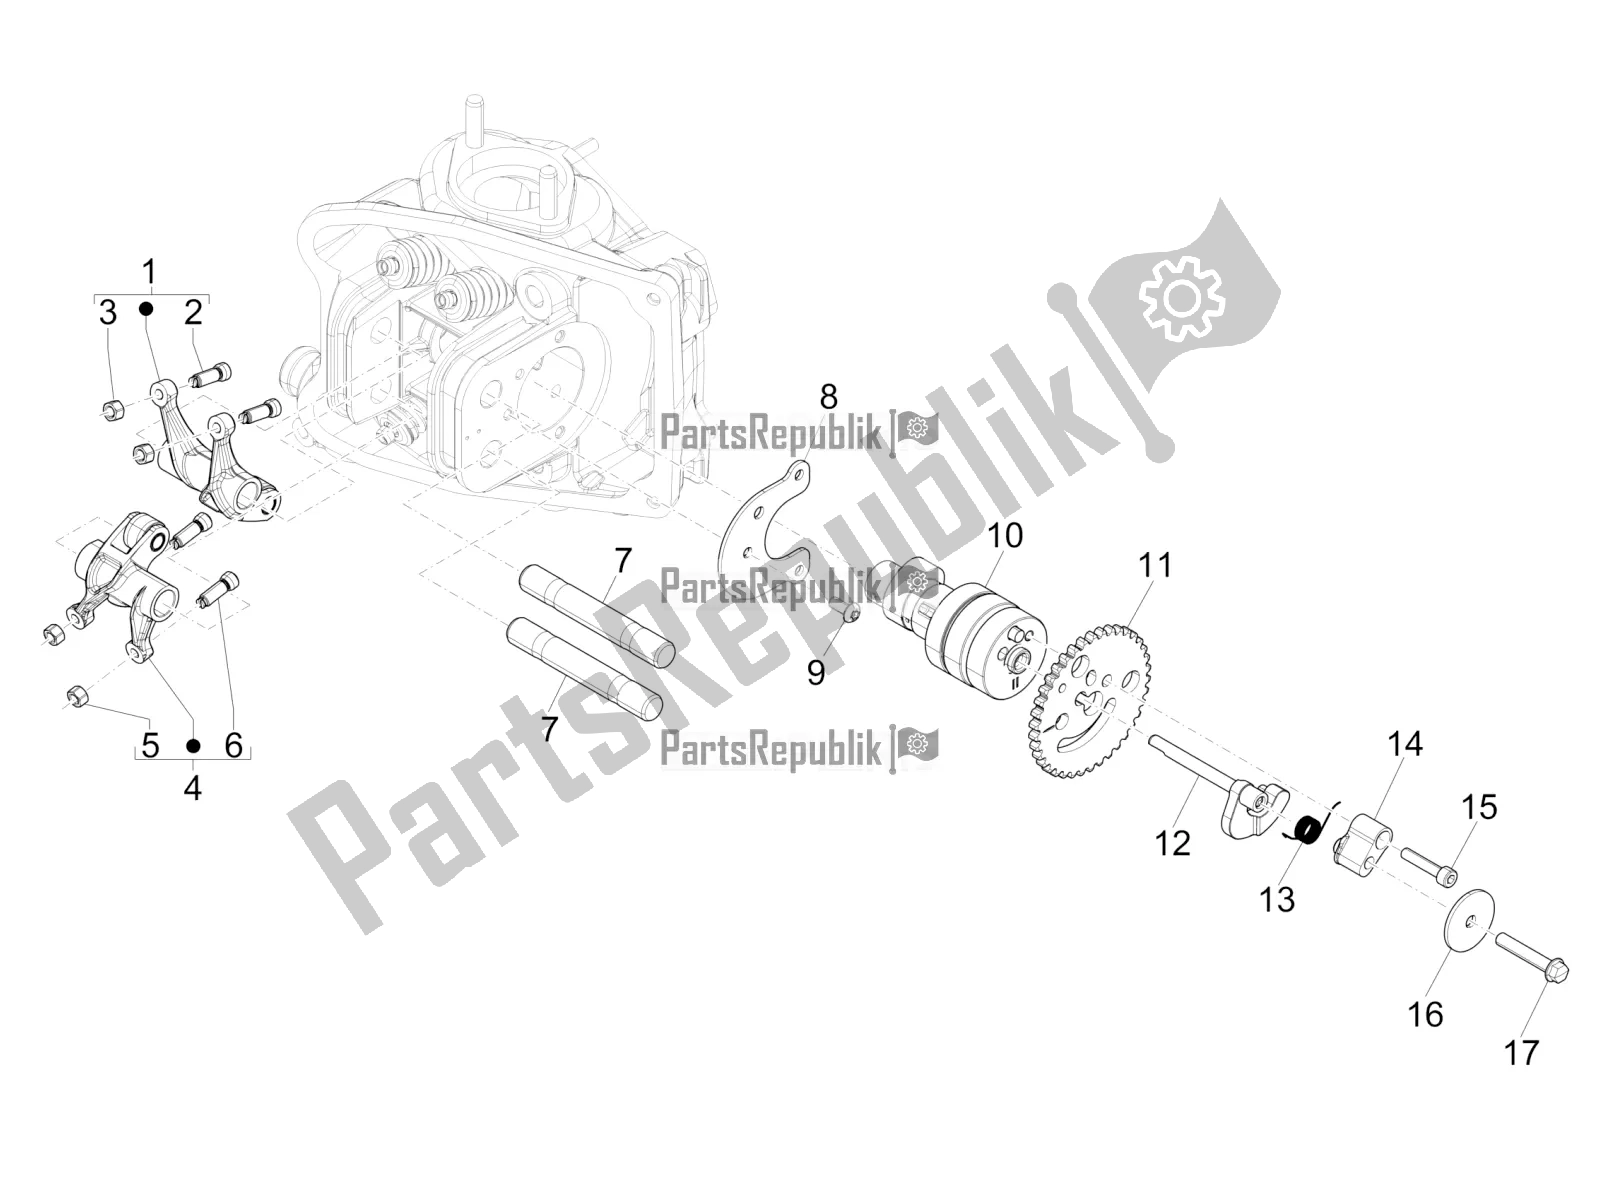 All parts for the Rocking Levers Support Unit of the Piaggio MP3 500 LT Sport-Business 2019